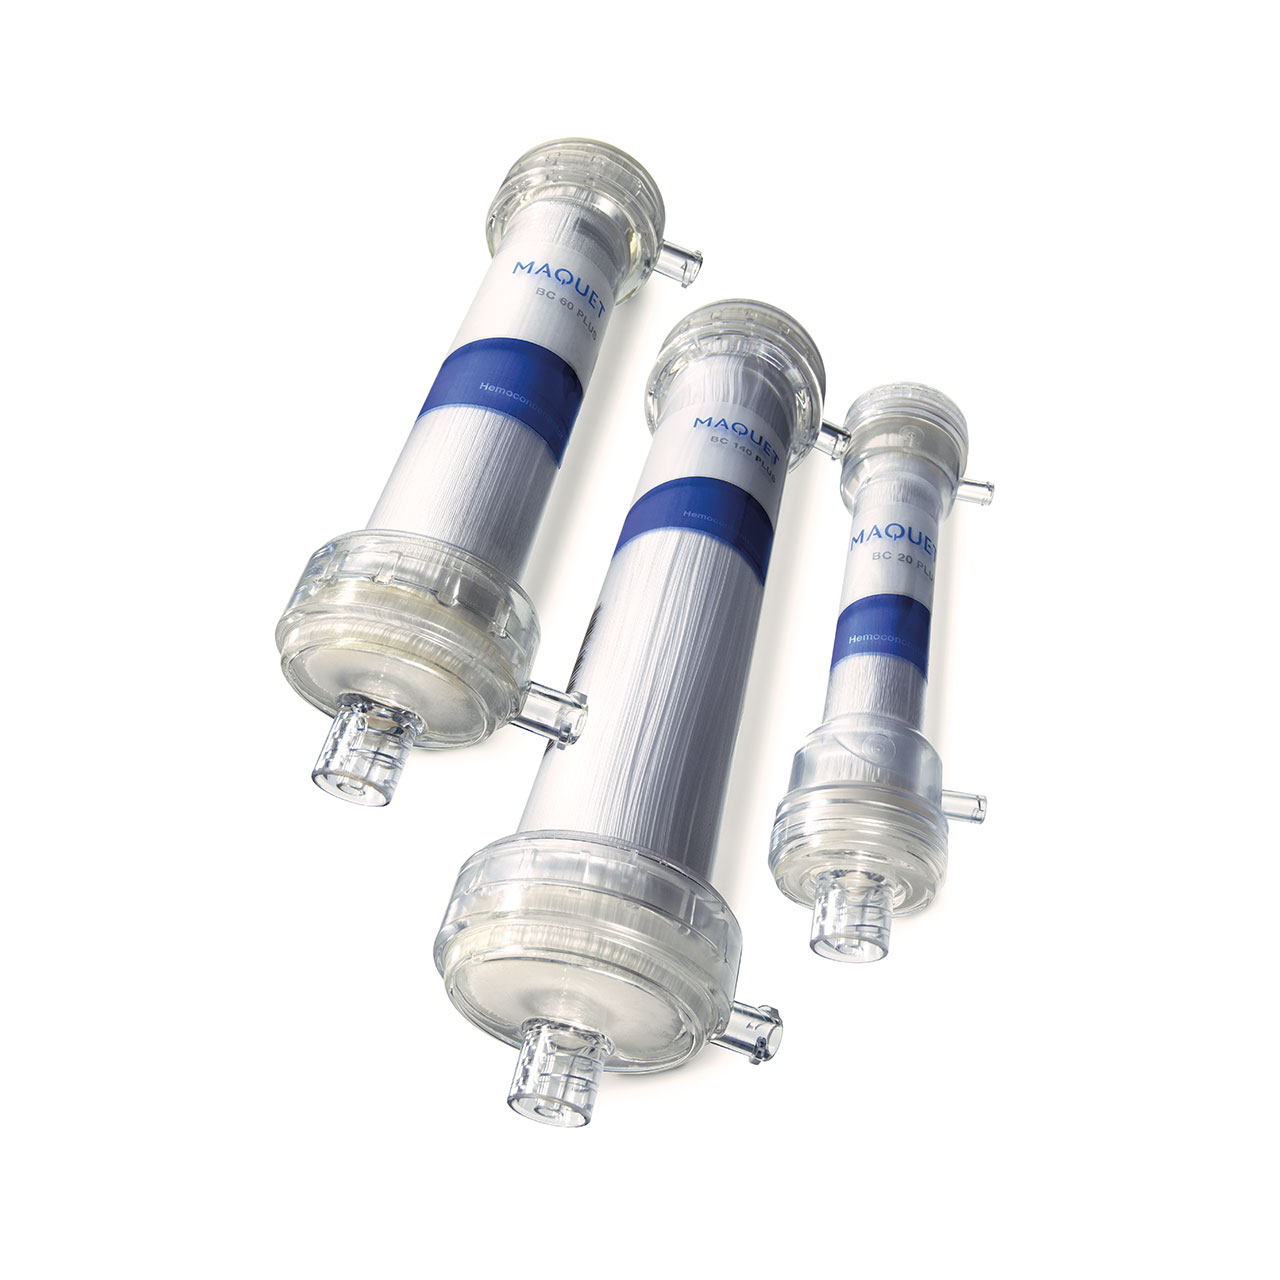 The hemoconcentrators provide optimum conservation of patient blood and minimize the need for homologous blood products.